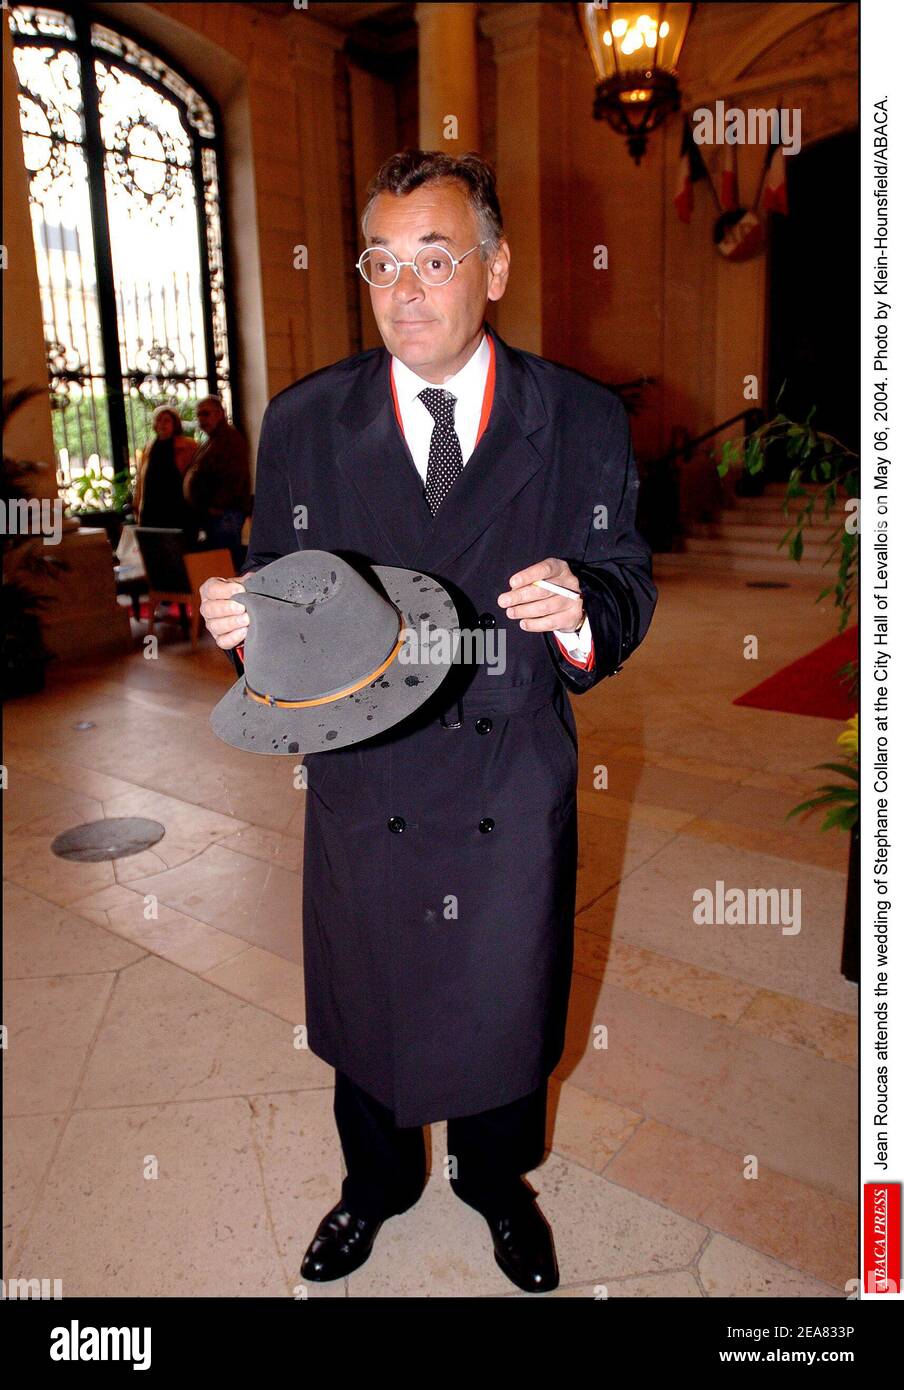 Jean Roucas attends the wedding of Stephane Collaro at the City Hall of Levallois on May 06, 2004. Photo by Klein-Hounsfield/ABACA. Stock Photo